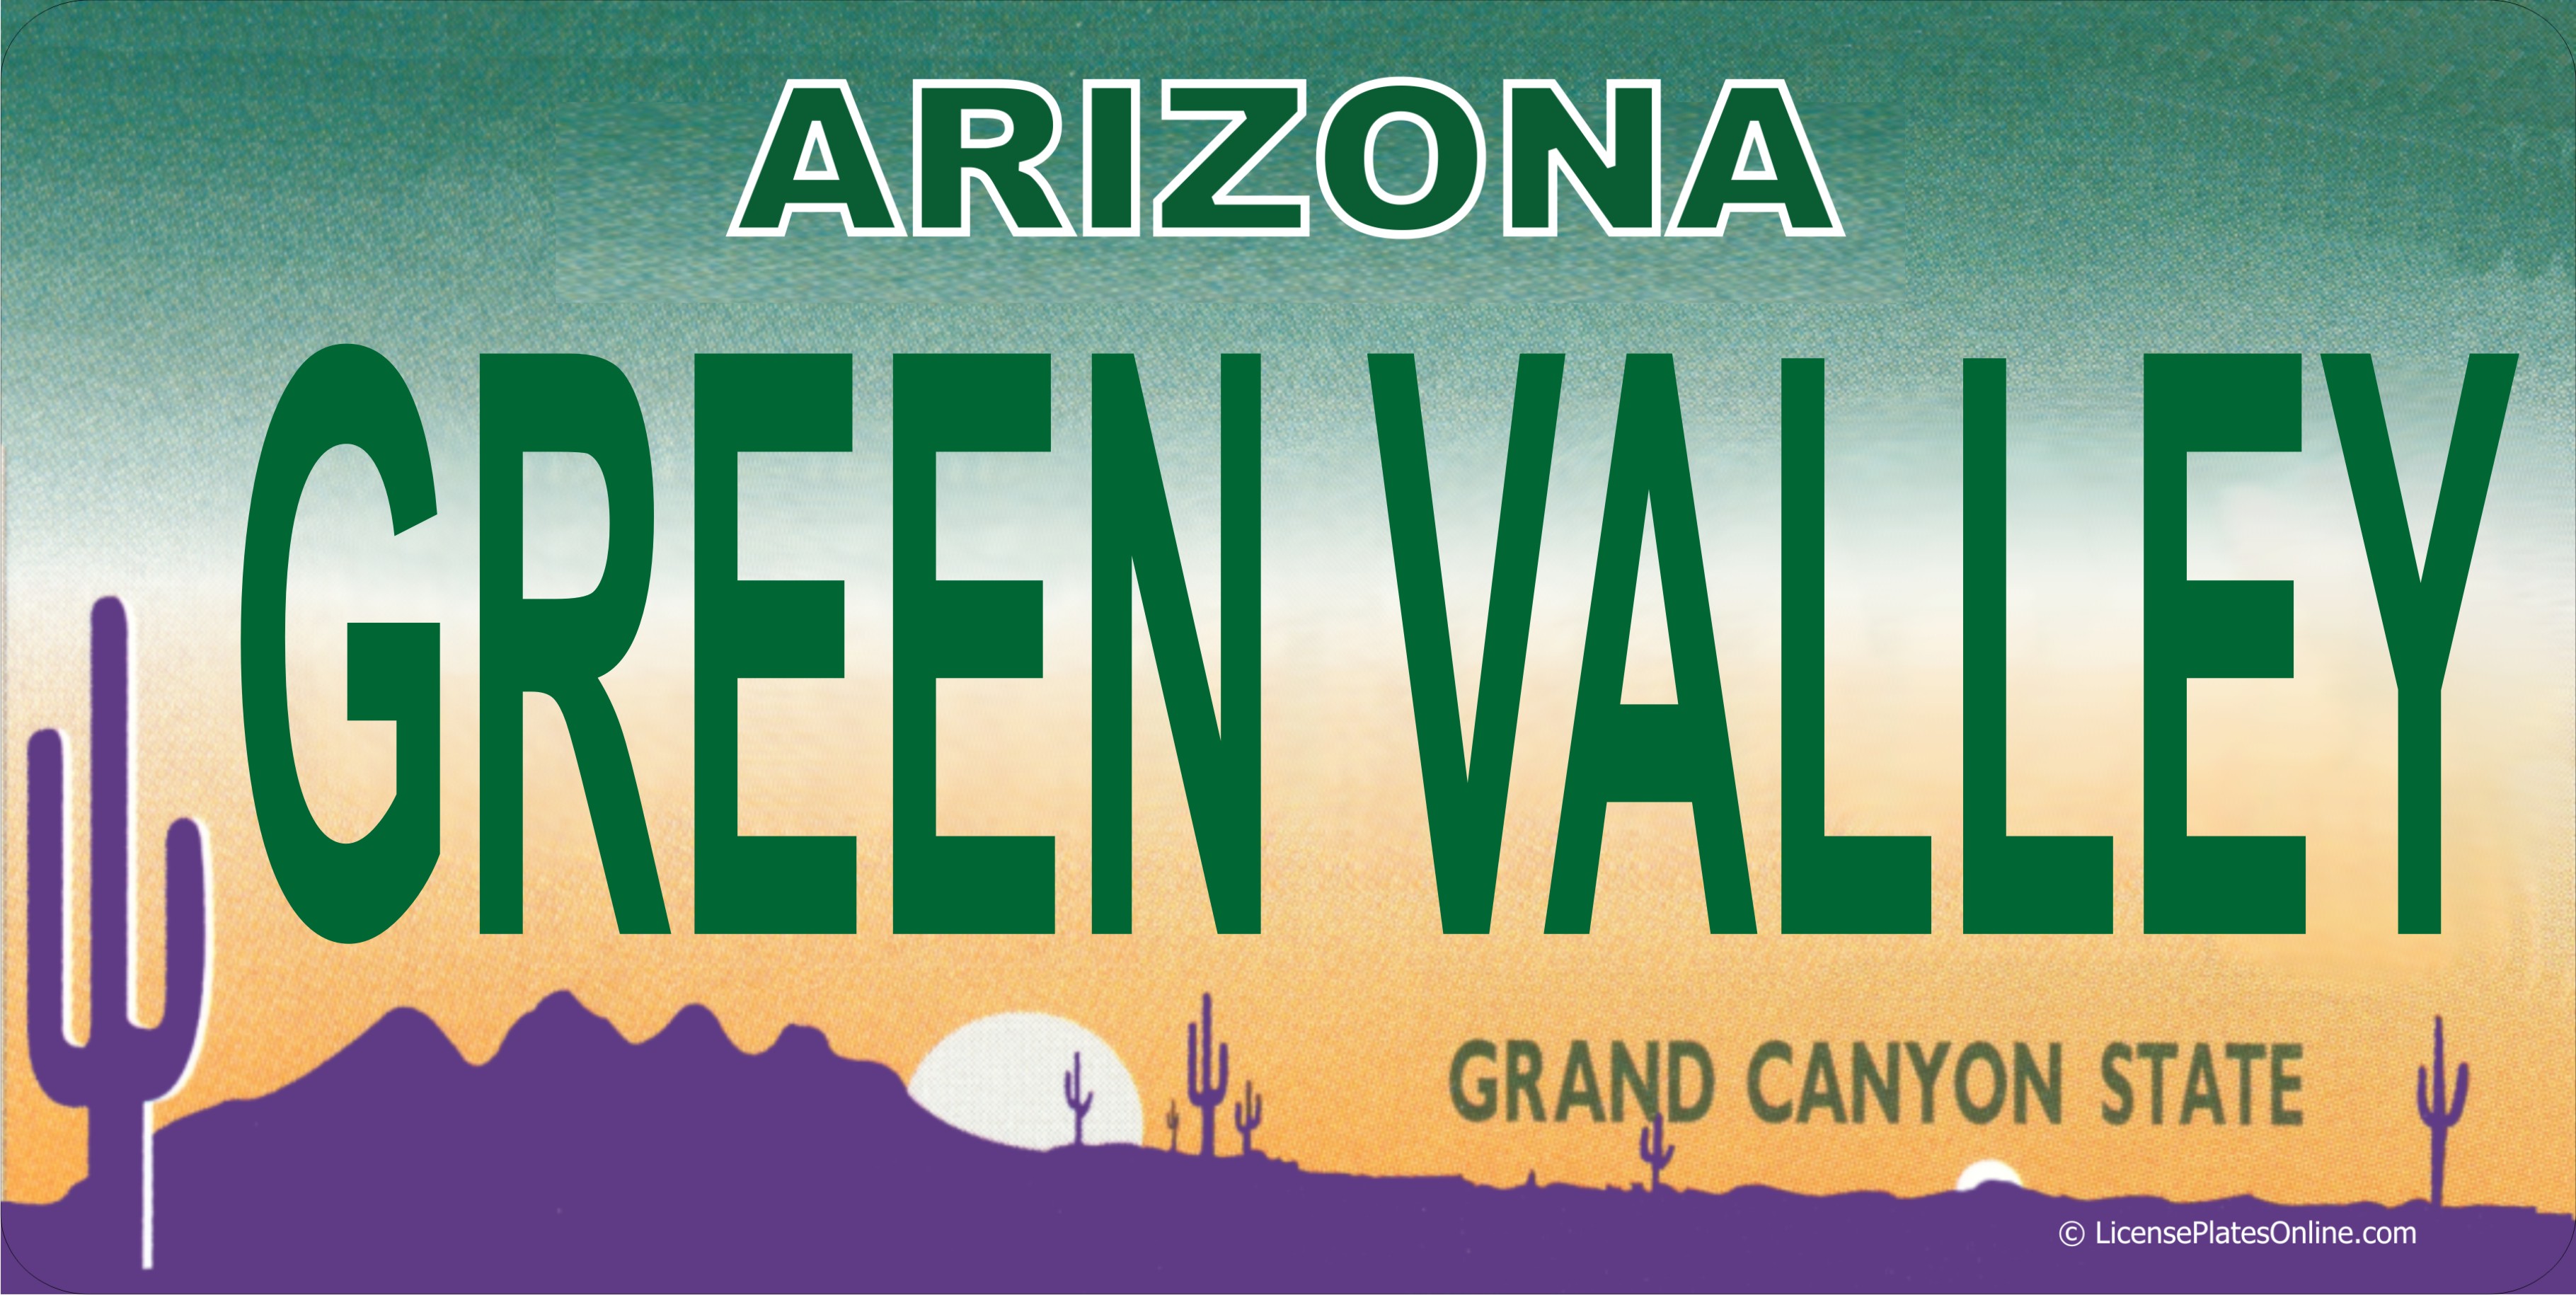 Arizona GREEN VALLEY Photo LICENSE PLATE   Free Personalization on this PLATE